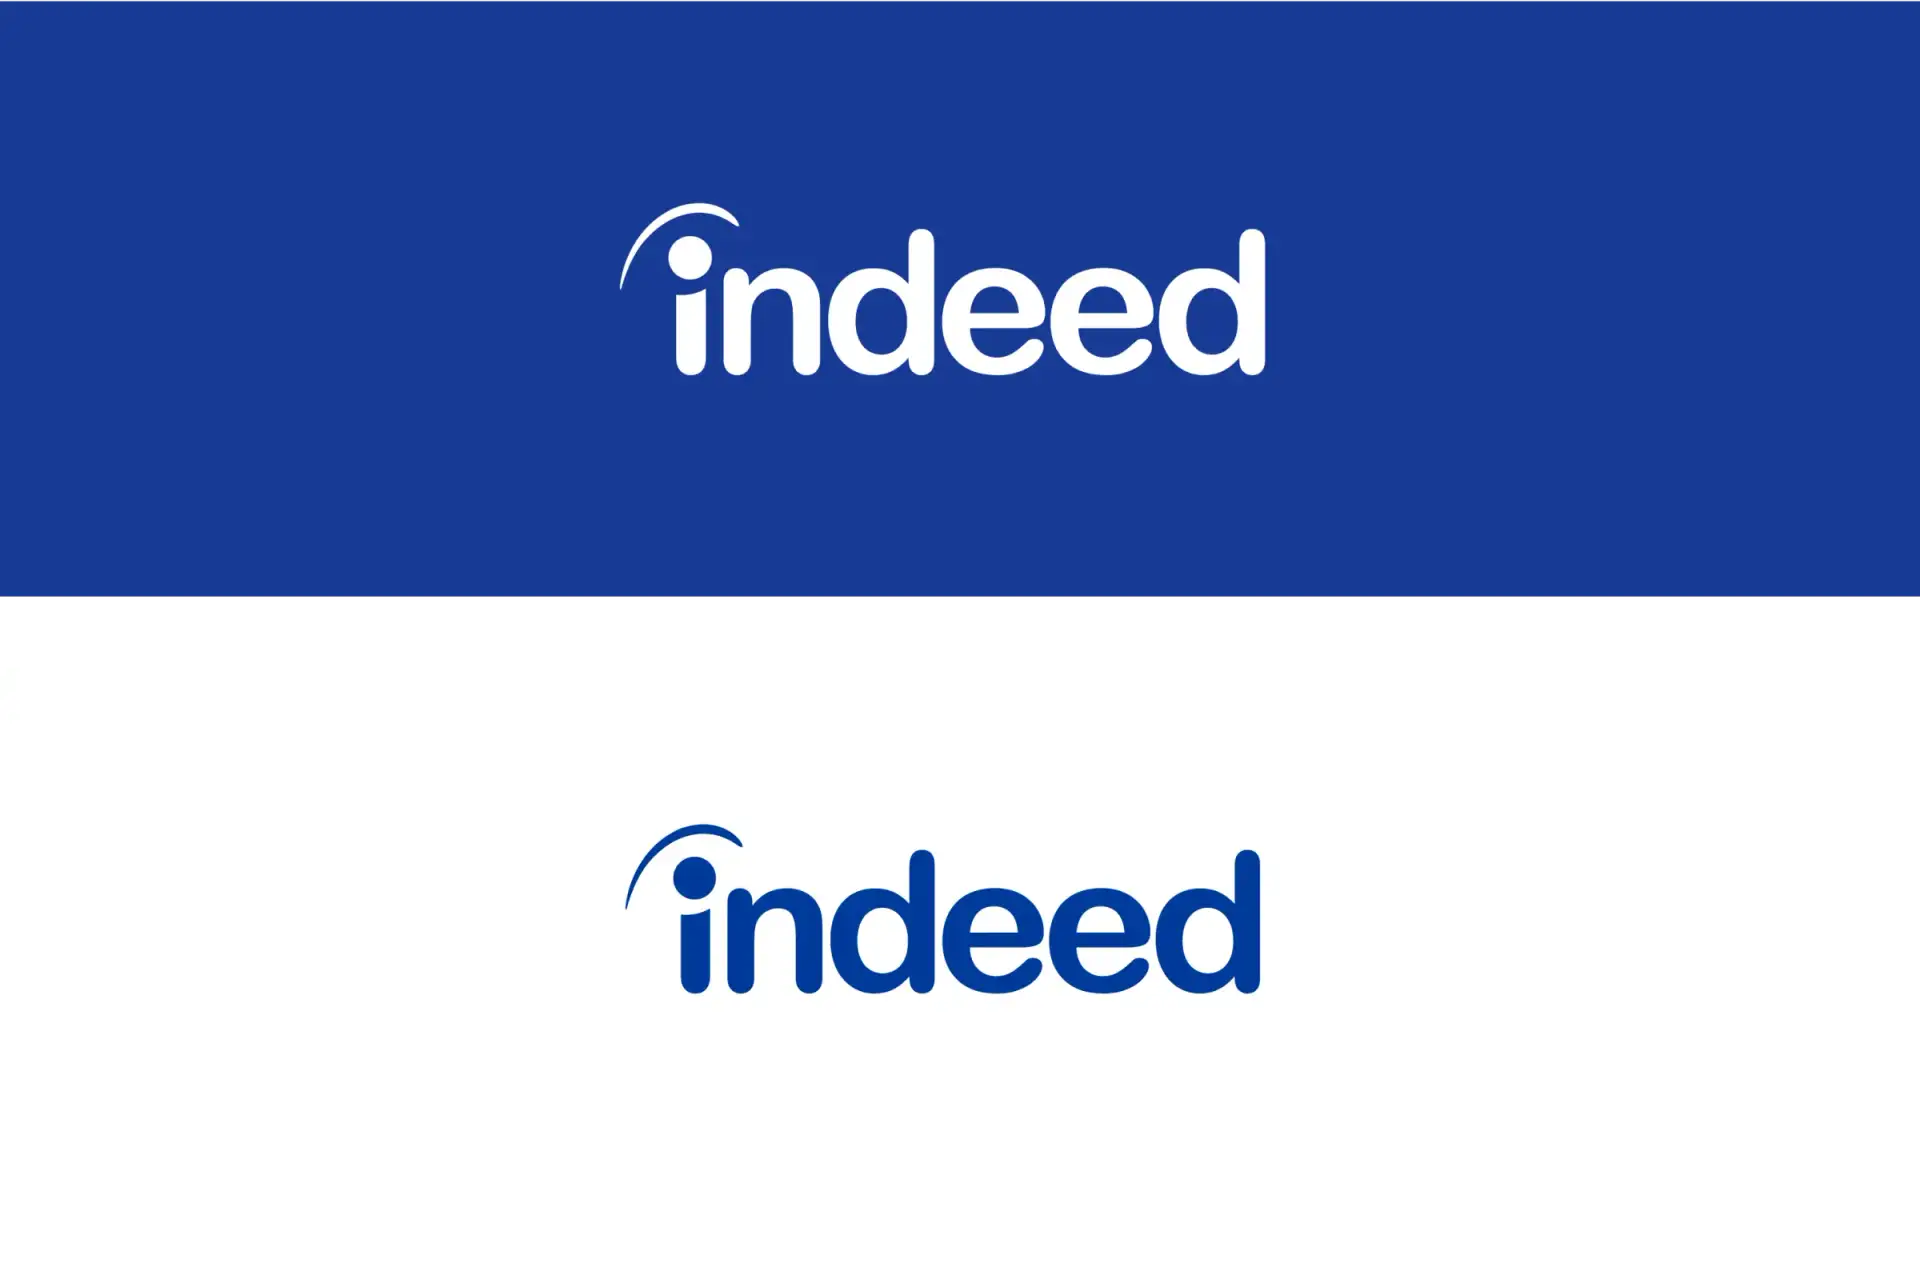 Indeed logo in white on blue and then blue on white